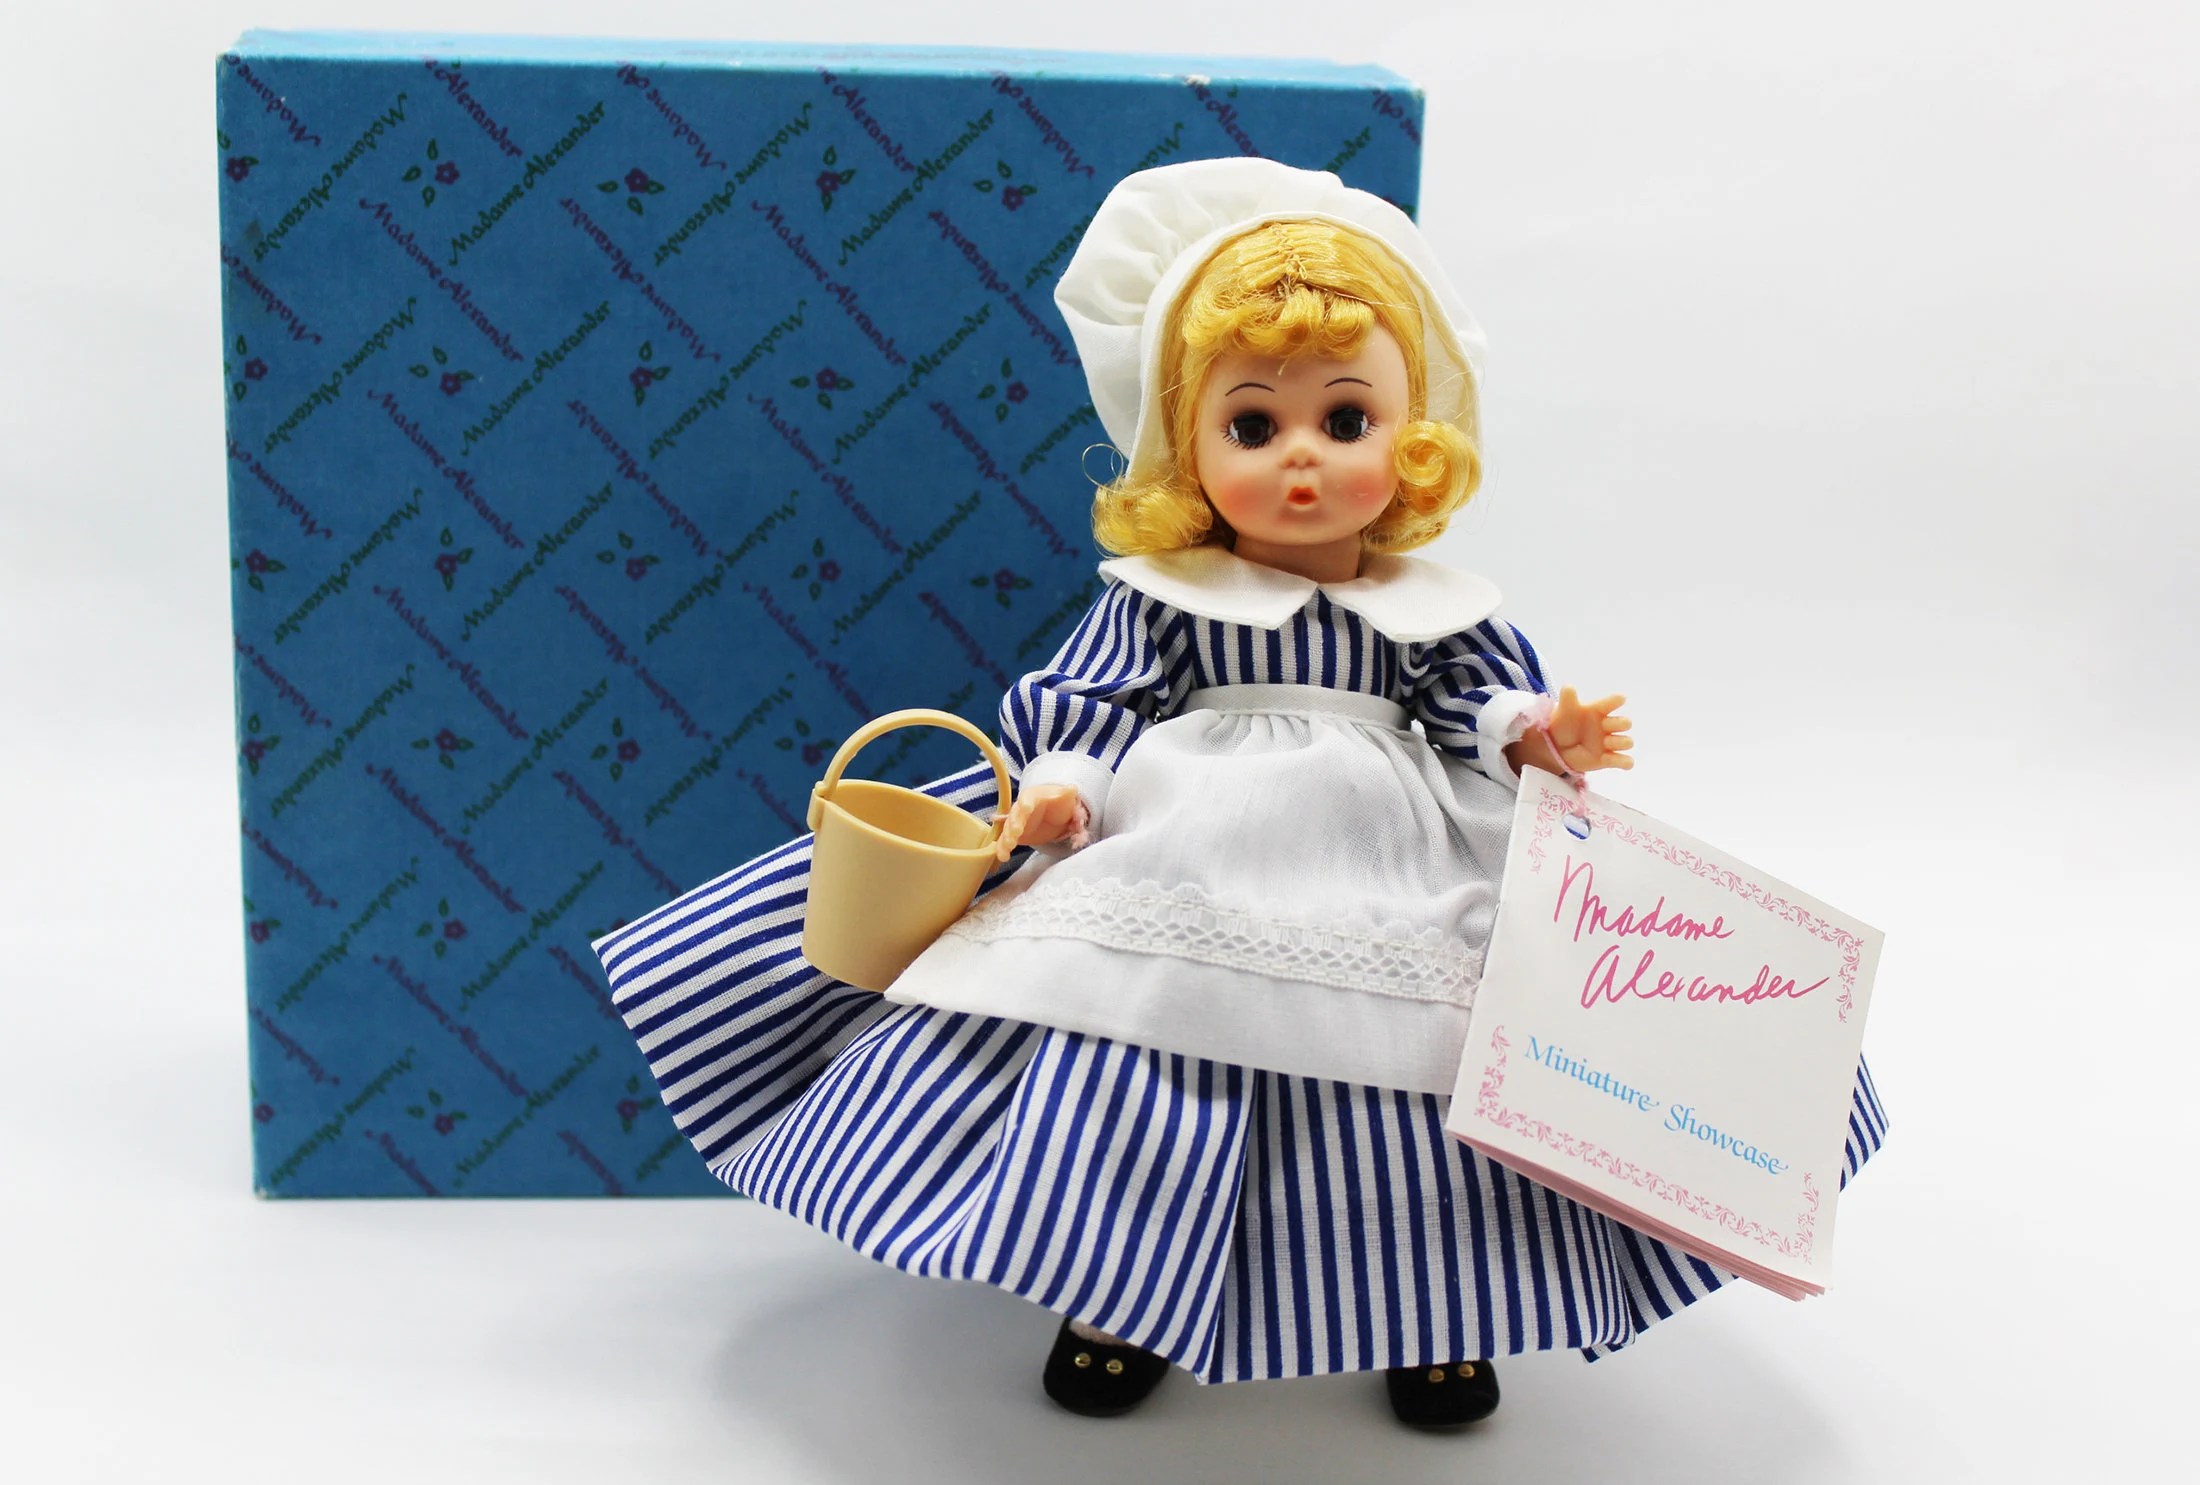 Madame Alexander – Little Maid Doll #423 – Storybook Series – Restrung - Vintage Doll w/ Box & Tag at A Dolly Hobby (Doll A)